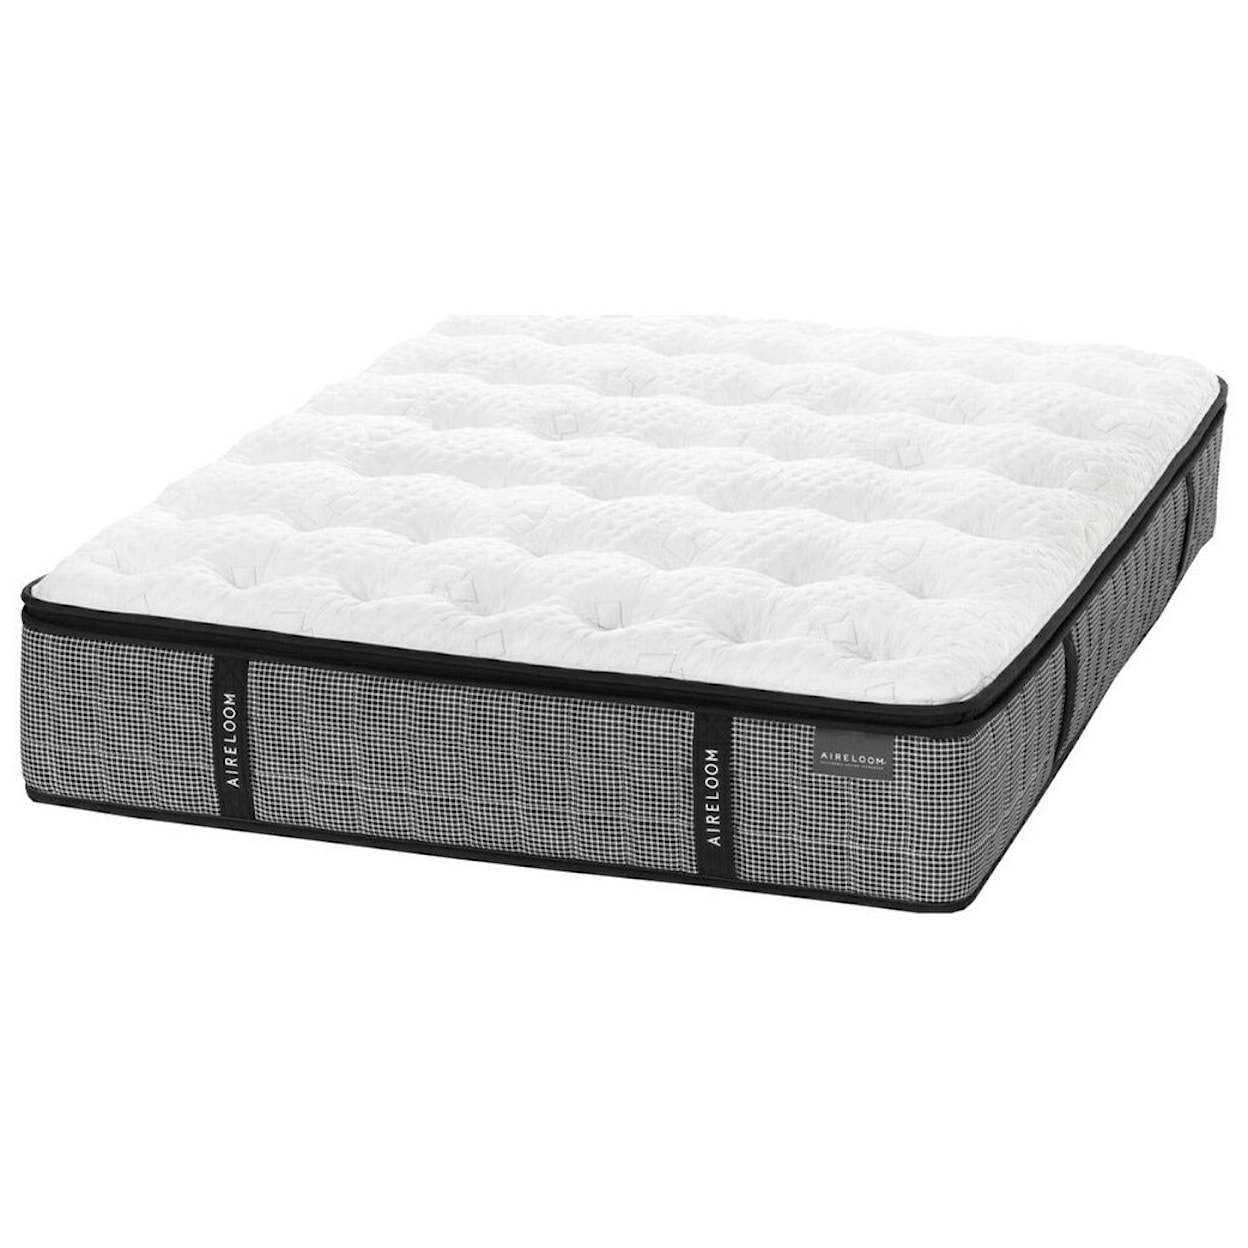 Aireloom Bedding PP Crystal Cove Luxetop Plush Queen Luxetop™ Plush Micro Coil Mattress